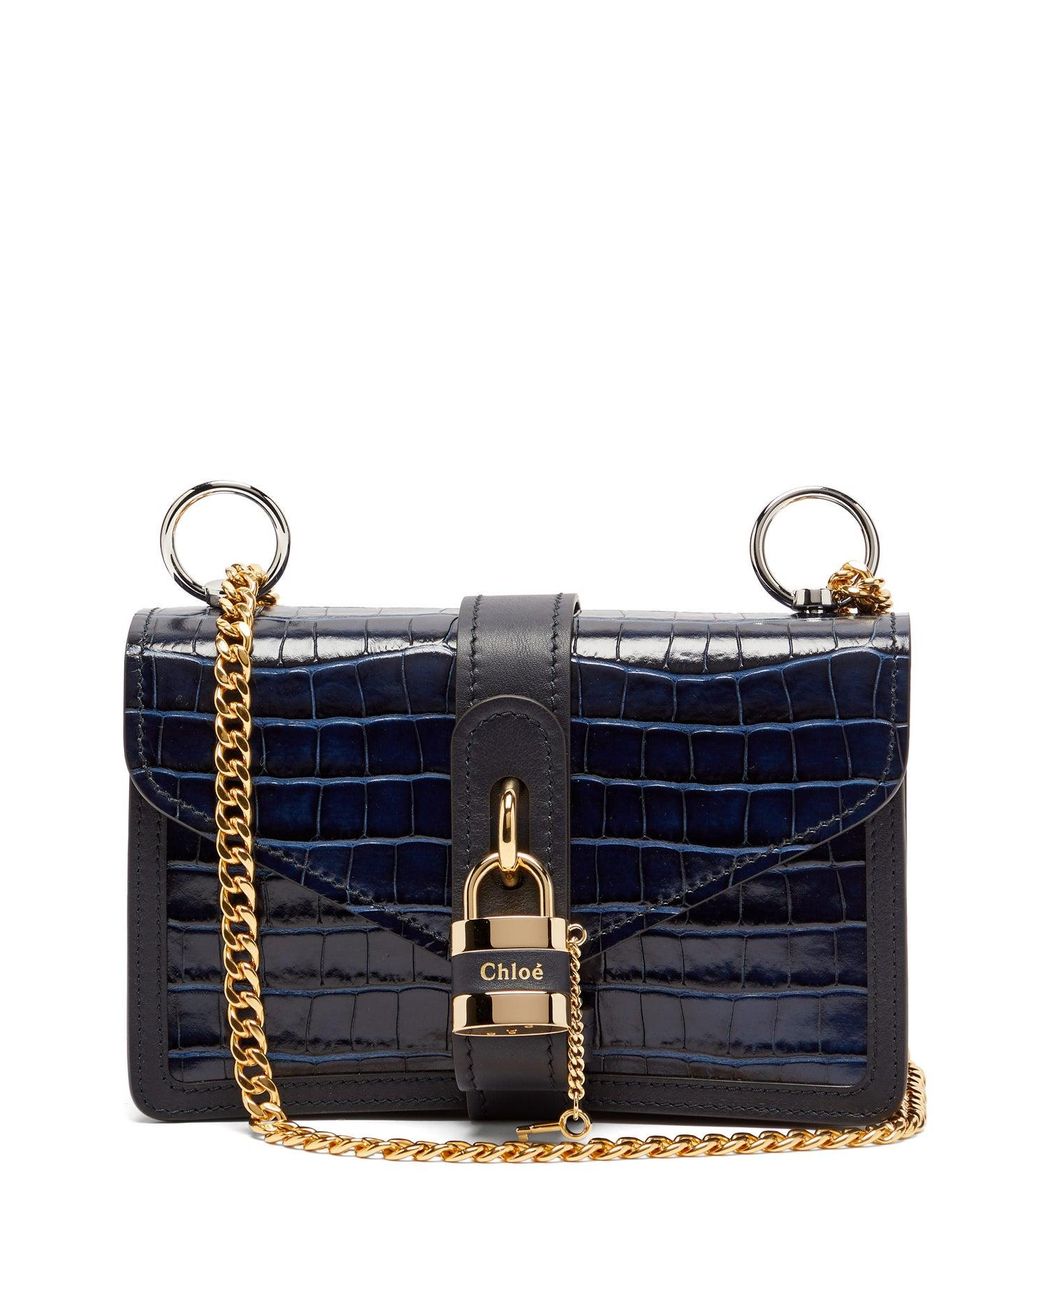 Chloé Aby Chain Croc-embossed Leather Shoulder Bag in Blue | Lyst